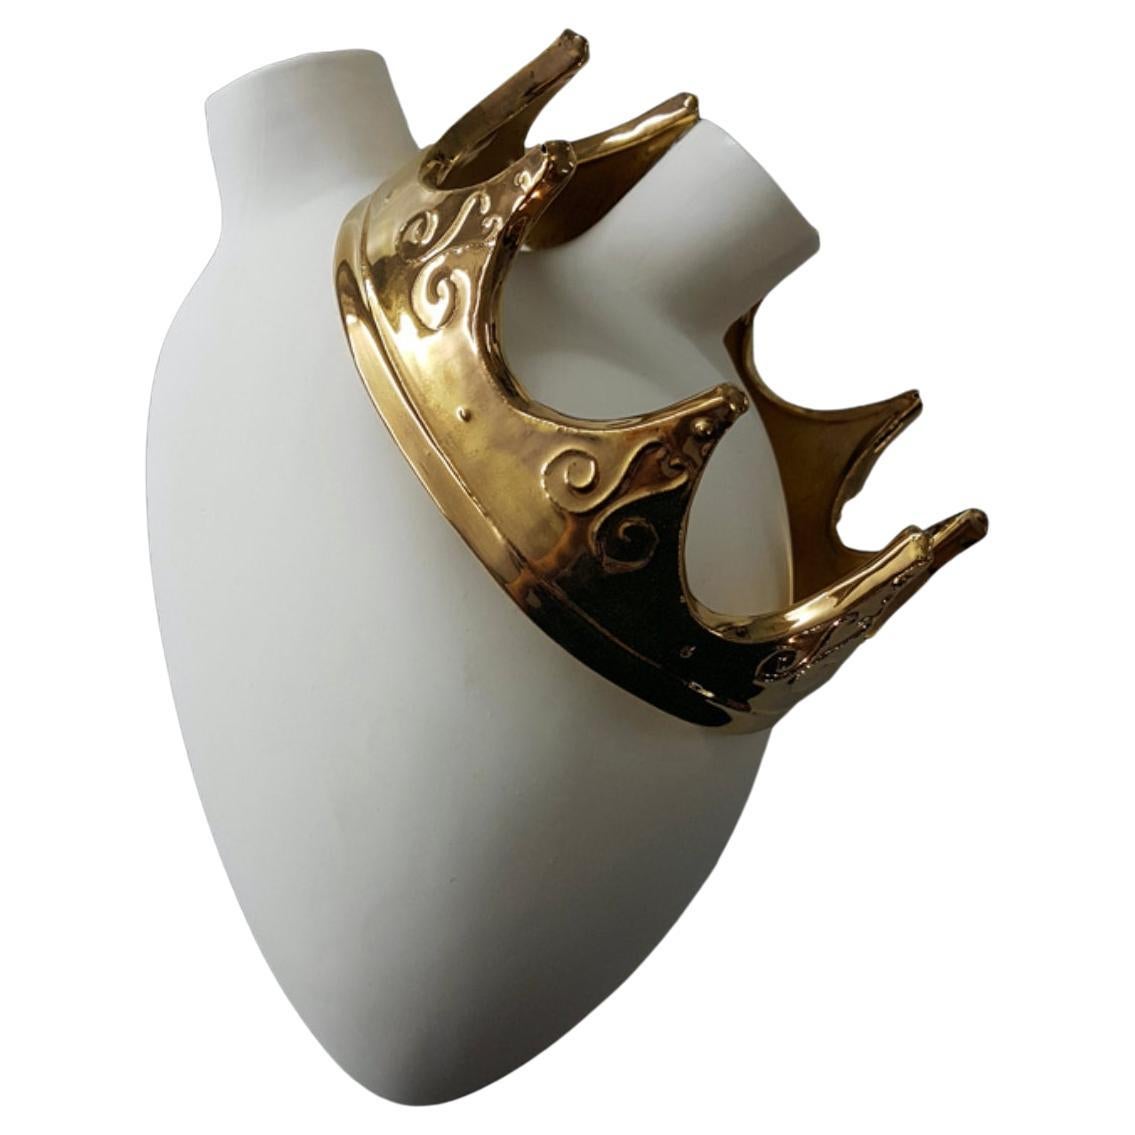 "Gold" Hearts Design Vases Set of 3 Pieces, Made in Italy, 2019, Wall Decor